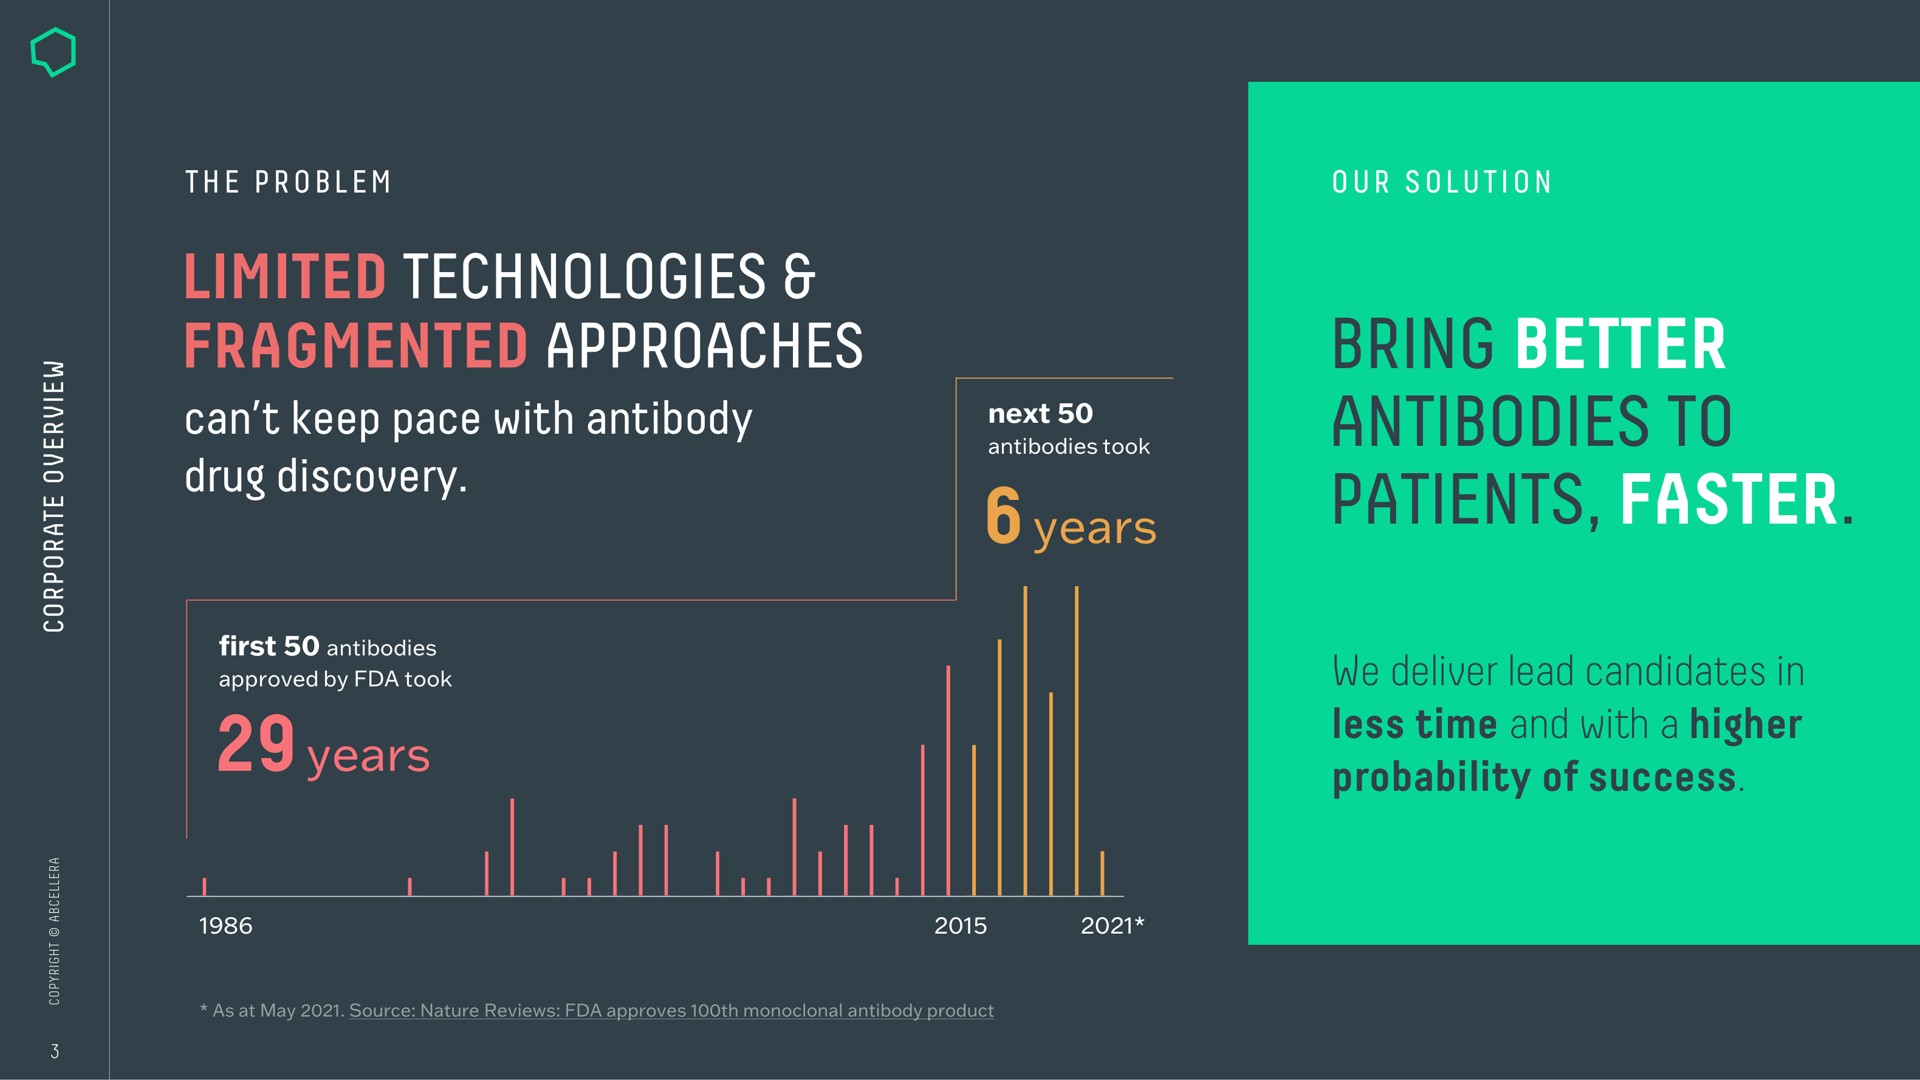 limited technologies fragmented approaches can keep pace with antibody drug discovery years years bring better antibodies to patients faster we deliver lead candidates in less time and with a higher probability of success snare | AbCellera